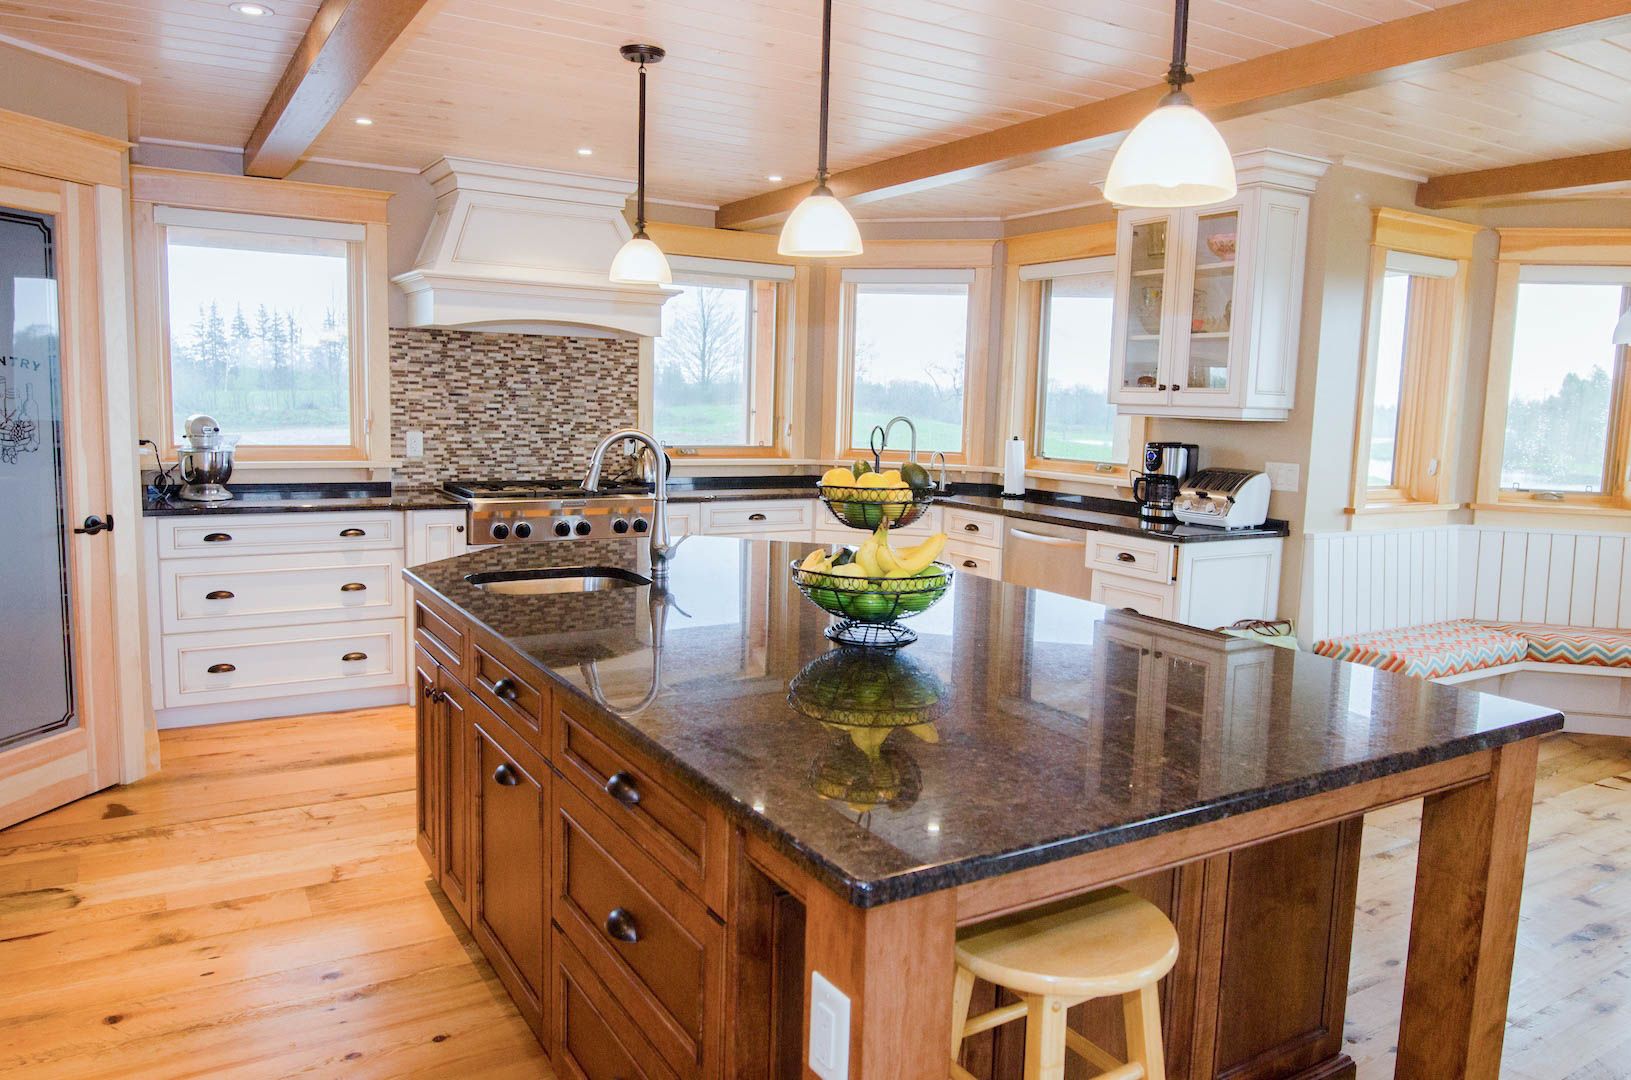 Kitchen Layout Mistakes: Expert Advice On What To Avoid